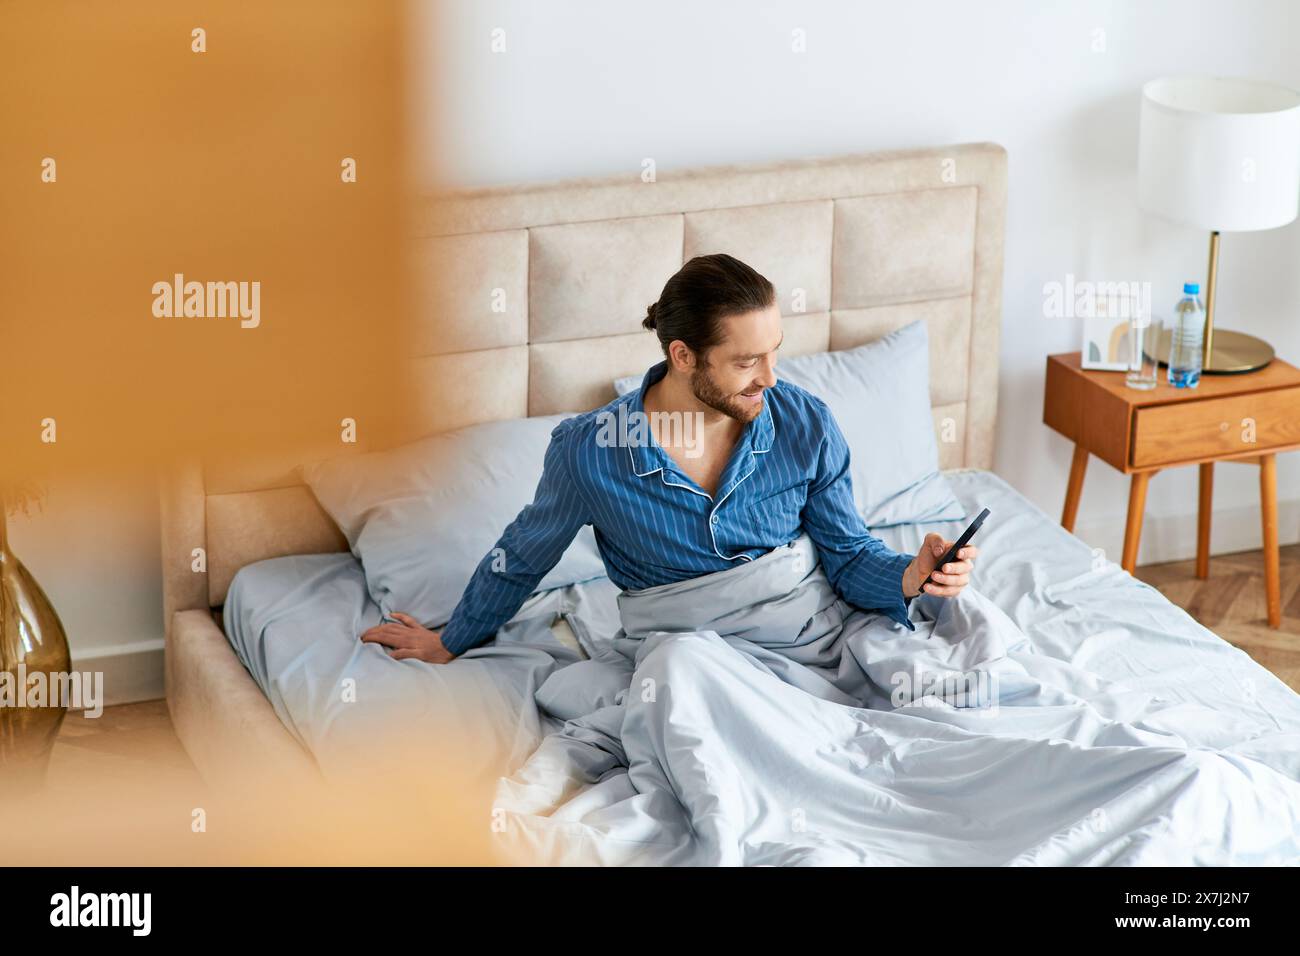 A man sits on his bed, engrossed in his cell phone screen. Stock Photo